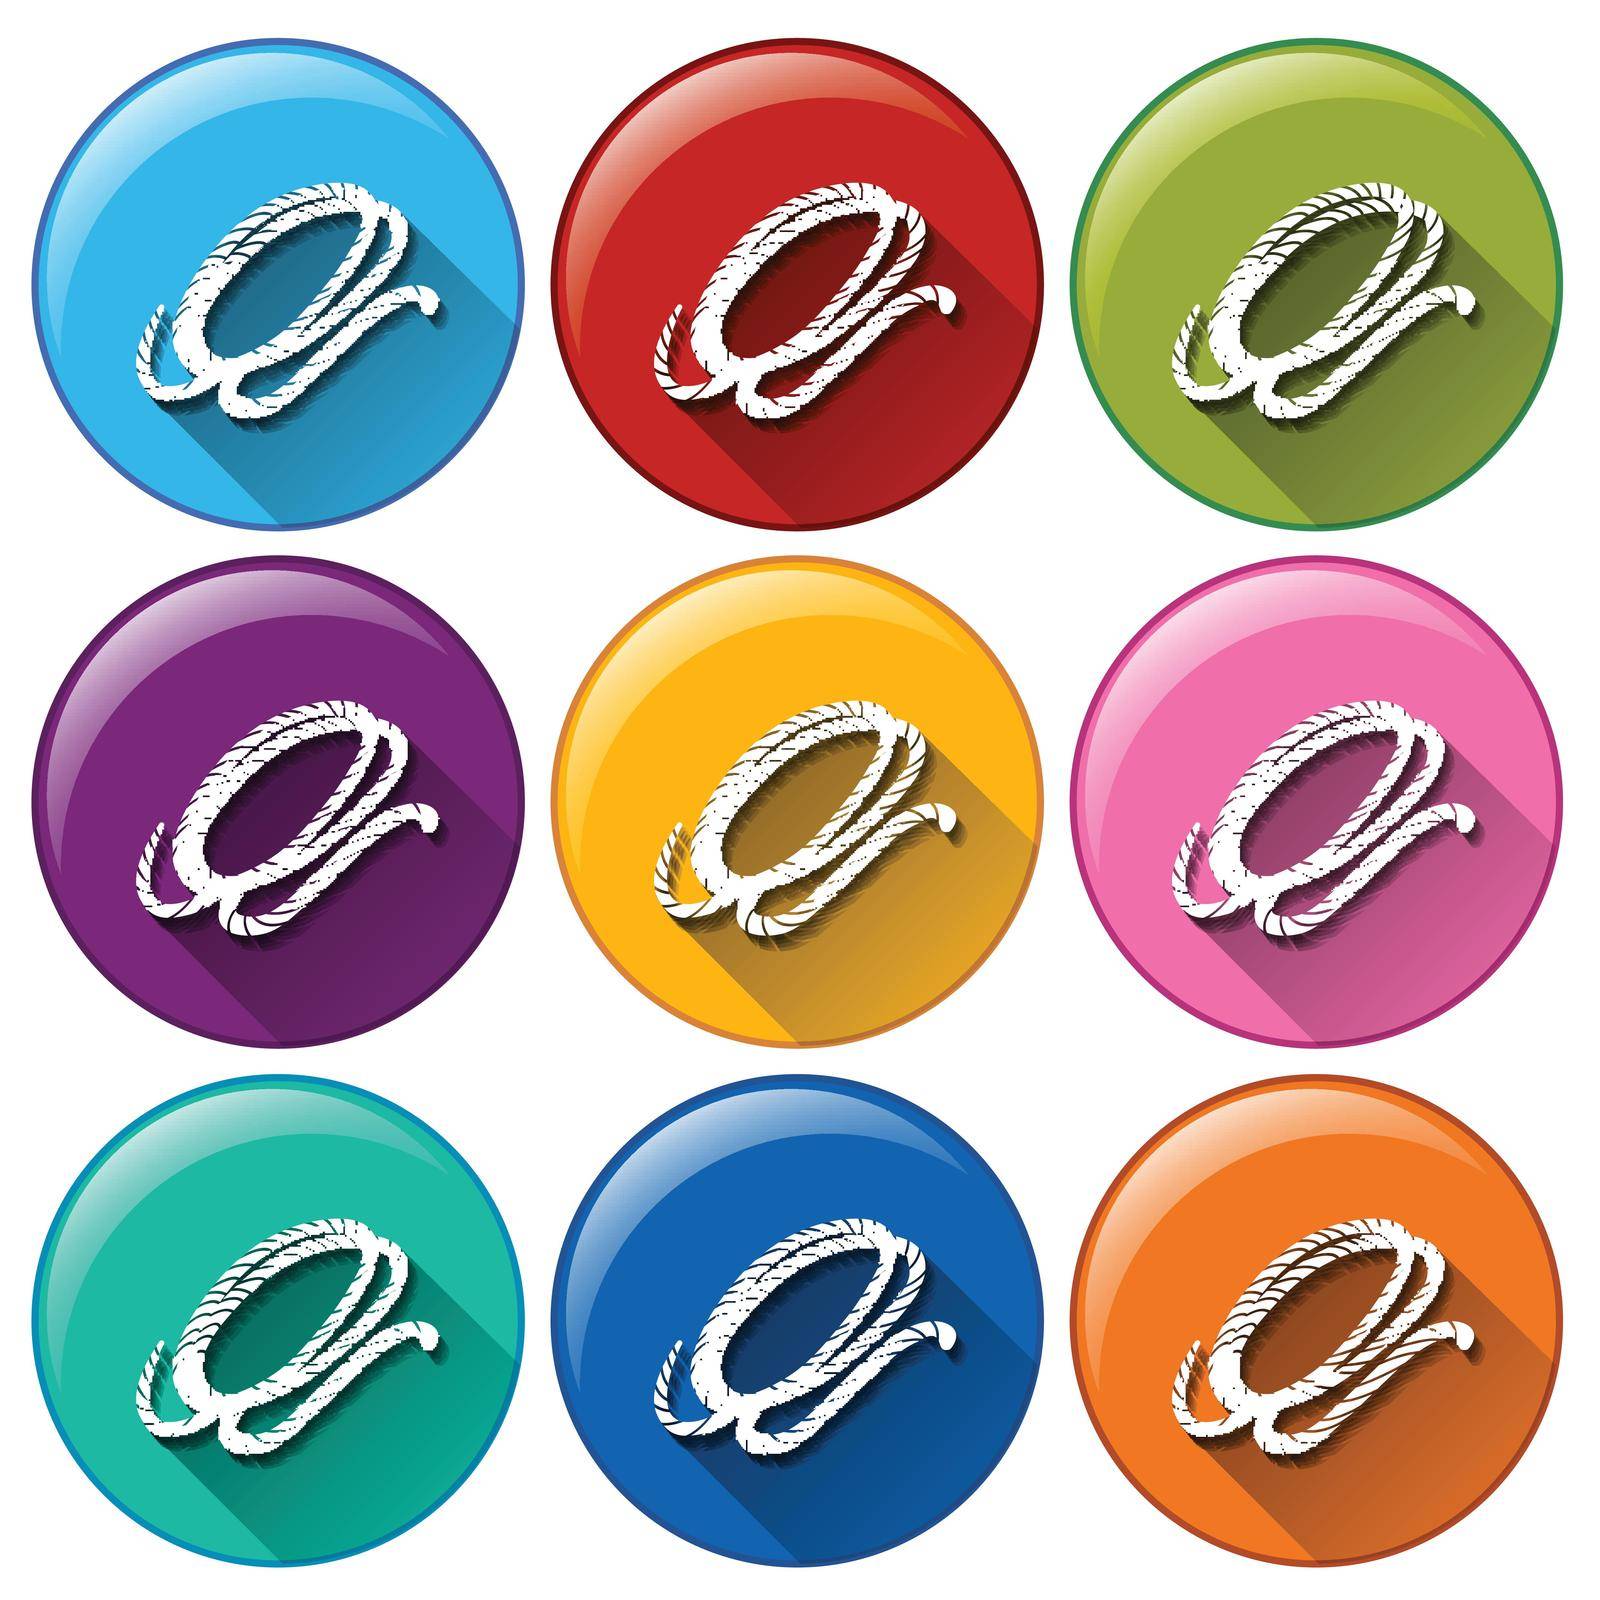 Illustration of the round buttons with a camping rope on a white background